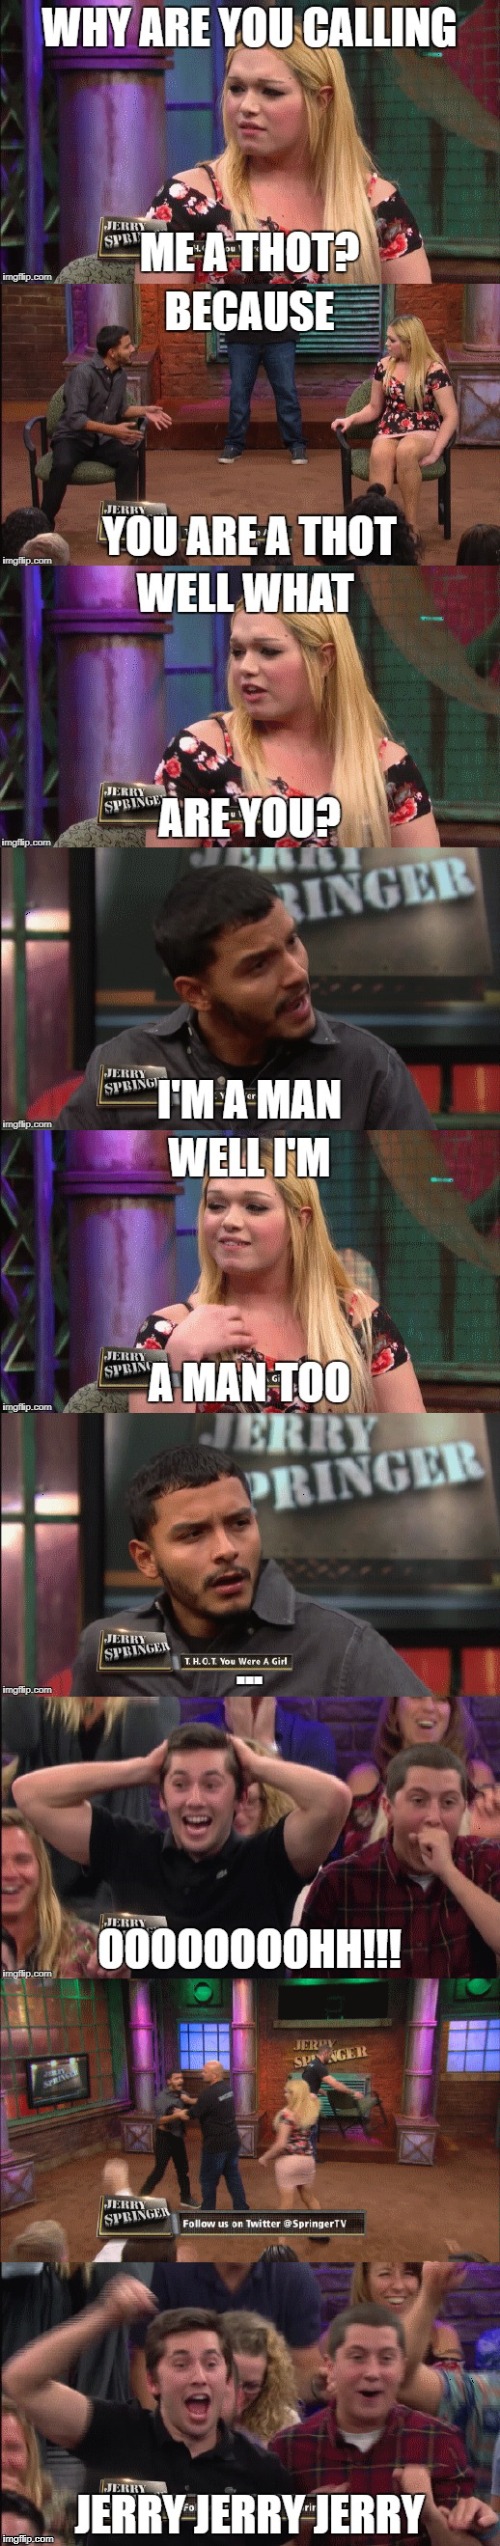 Savage comeback - Jerry Springer show | image tagged in funny memes,funny | made w/ Imgflip meme maker